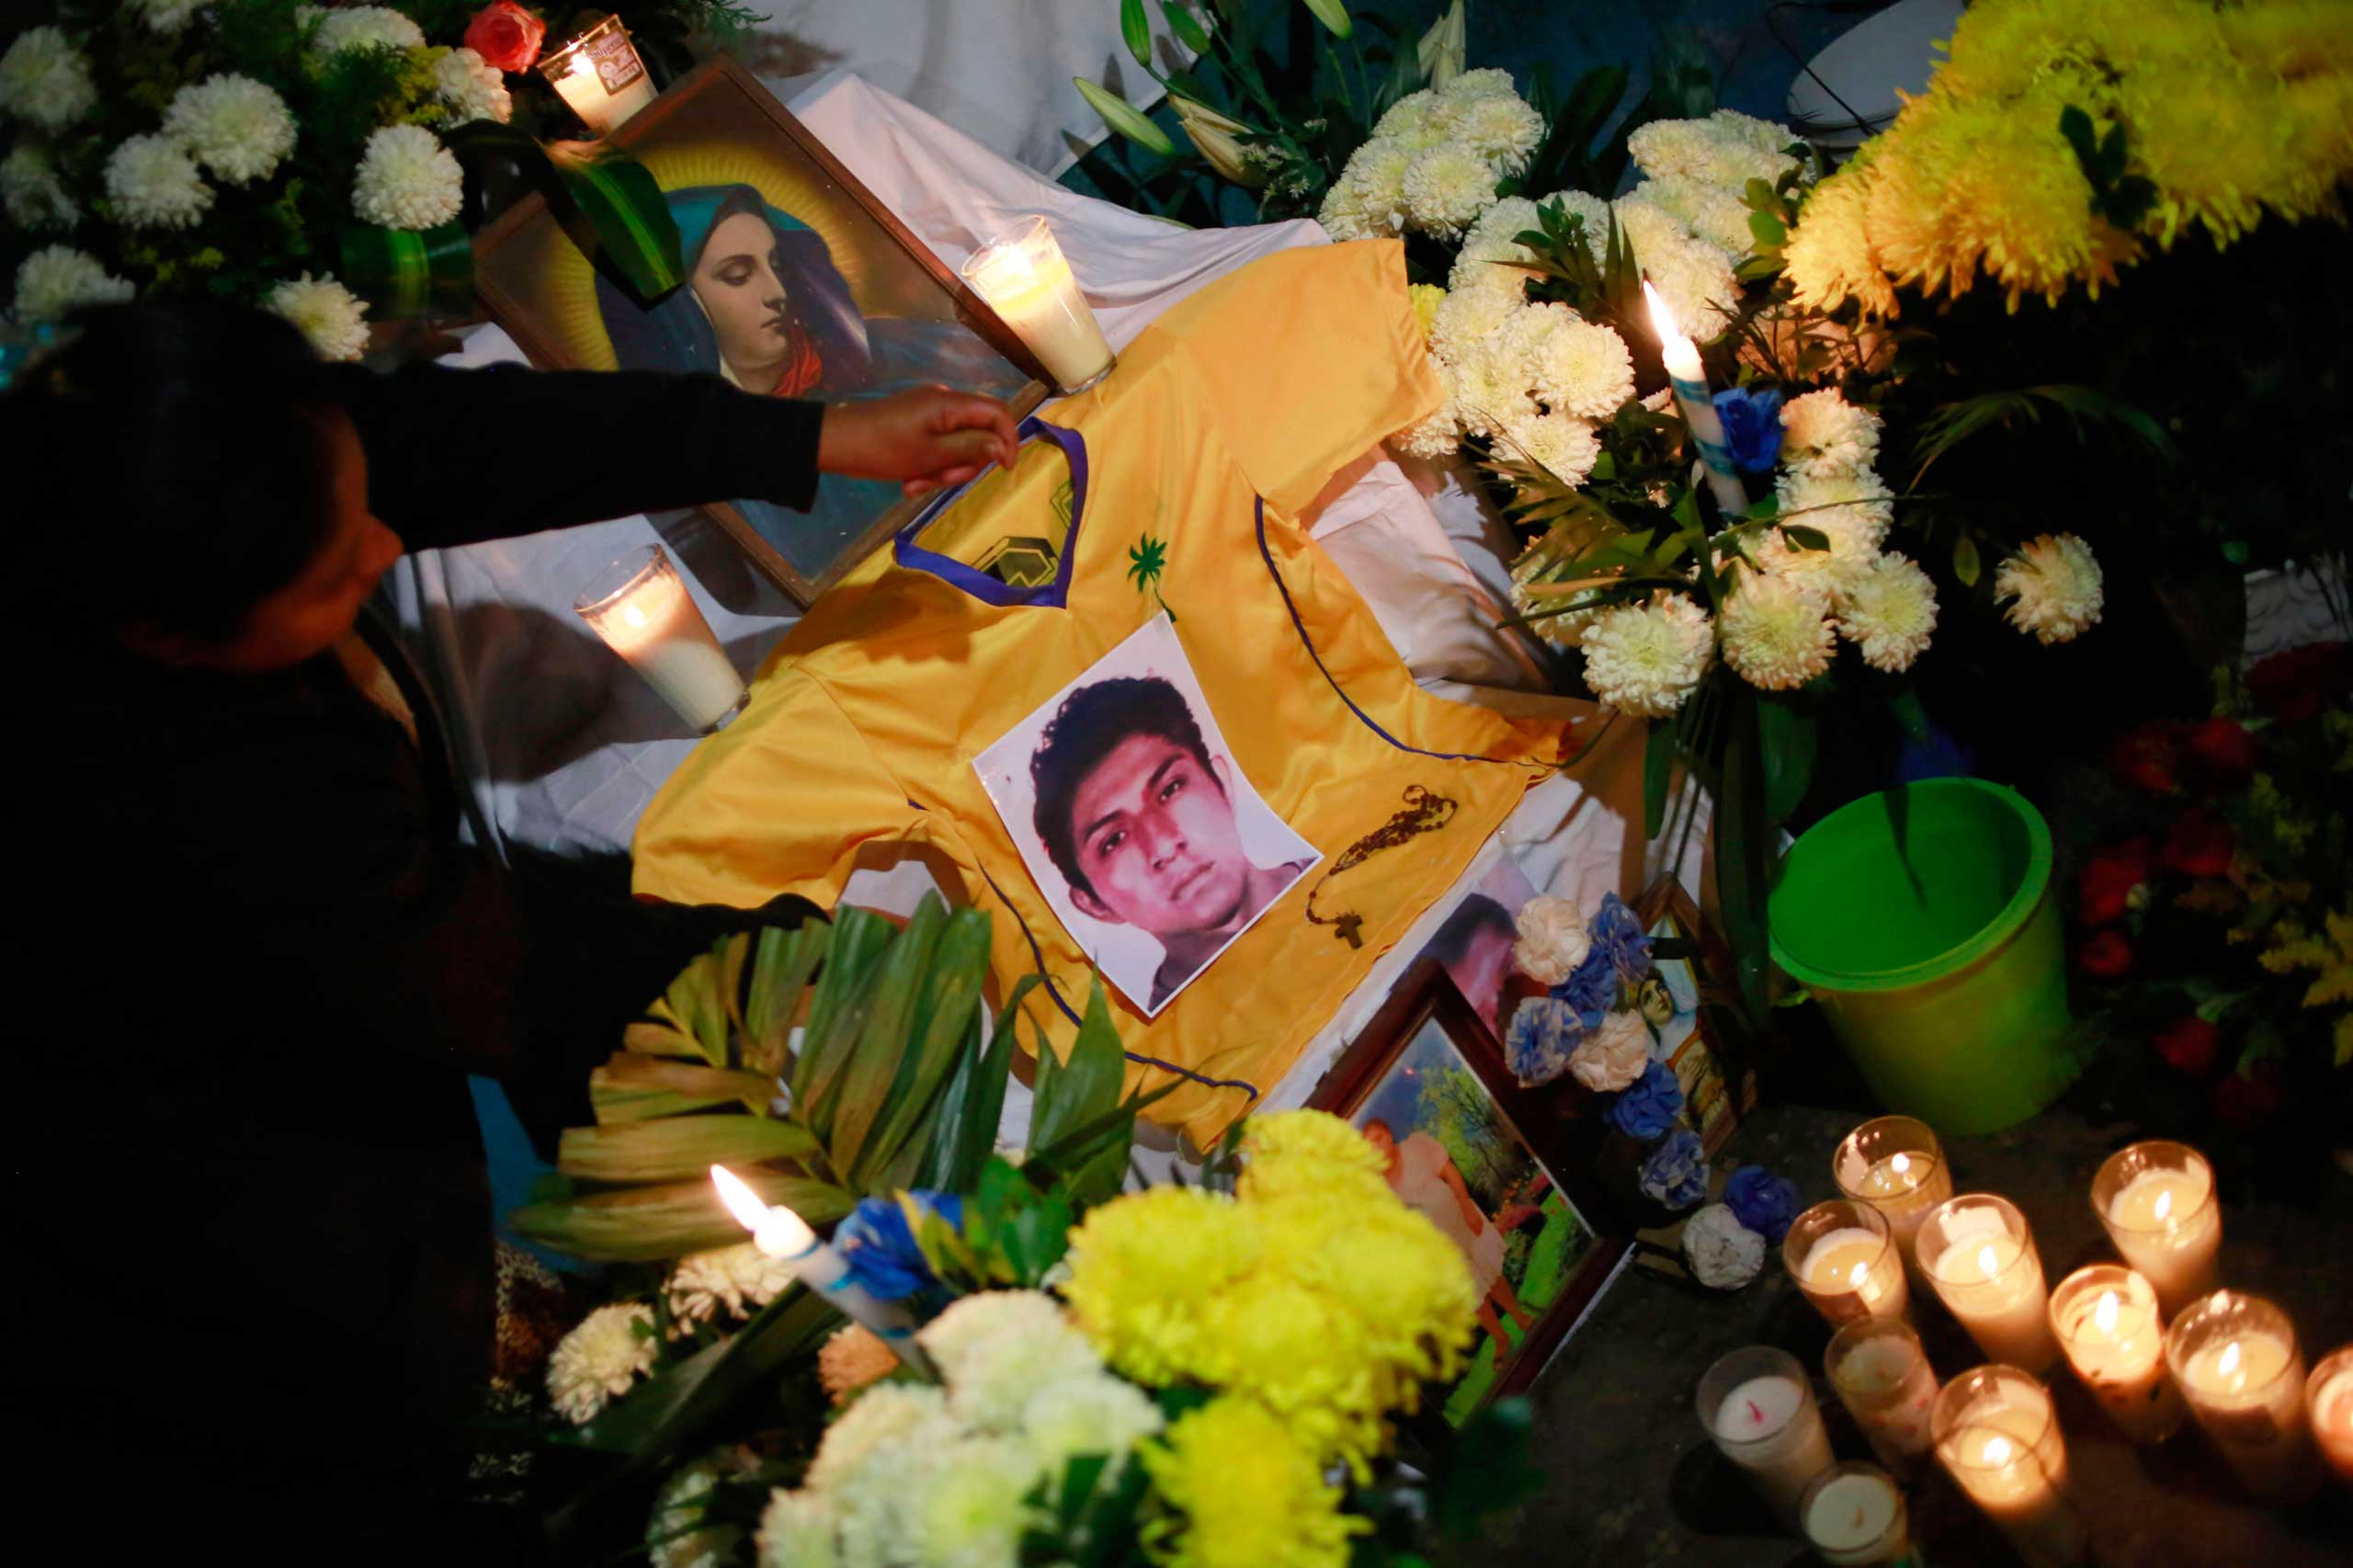 A photo of Alexander Mora Venancio is seen at an altar in the house of his father in El Pericon, in the southern Mexican state of Guerrero